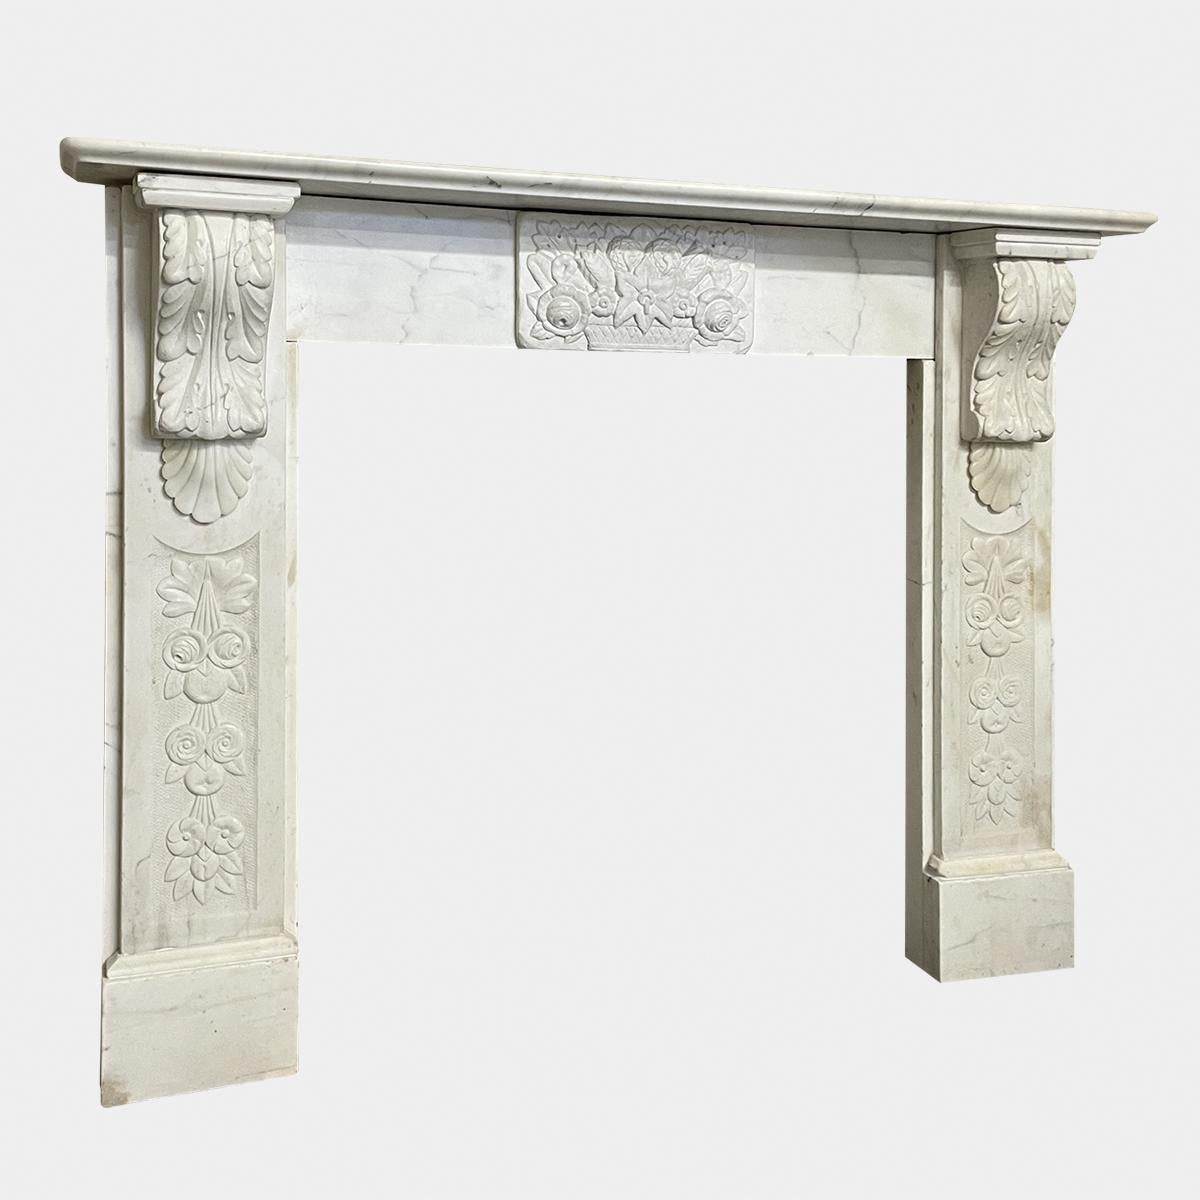 A Victorian antique marble fireplace carved in Statuary white marble. A reclaimed piece, restored as lovingly as possible. The jambs with panels of carved foliate, surmounted by carved acanthus leaf corbels. The frieze with centre tablet basket